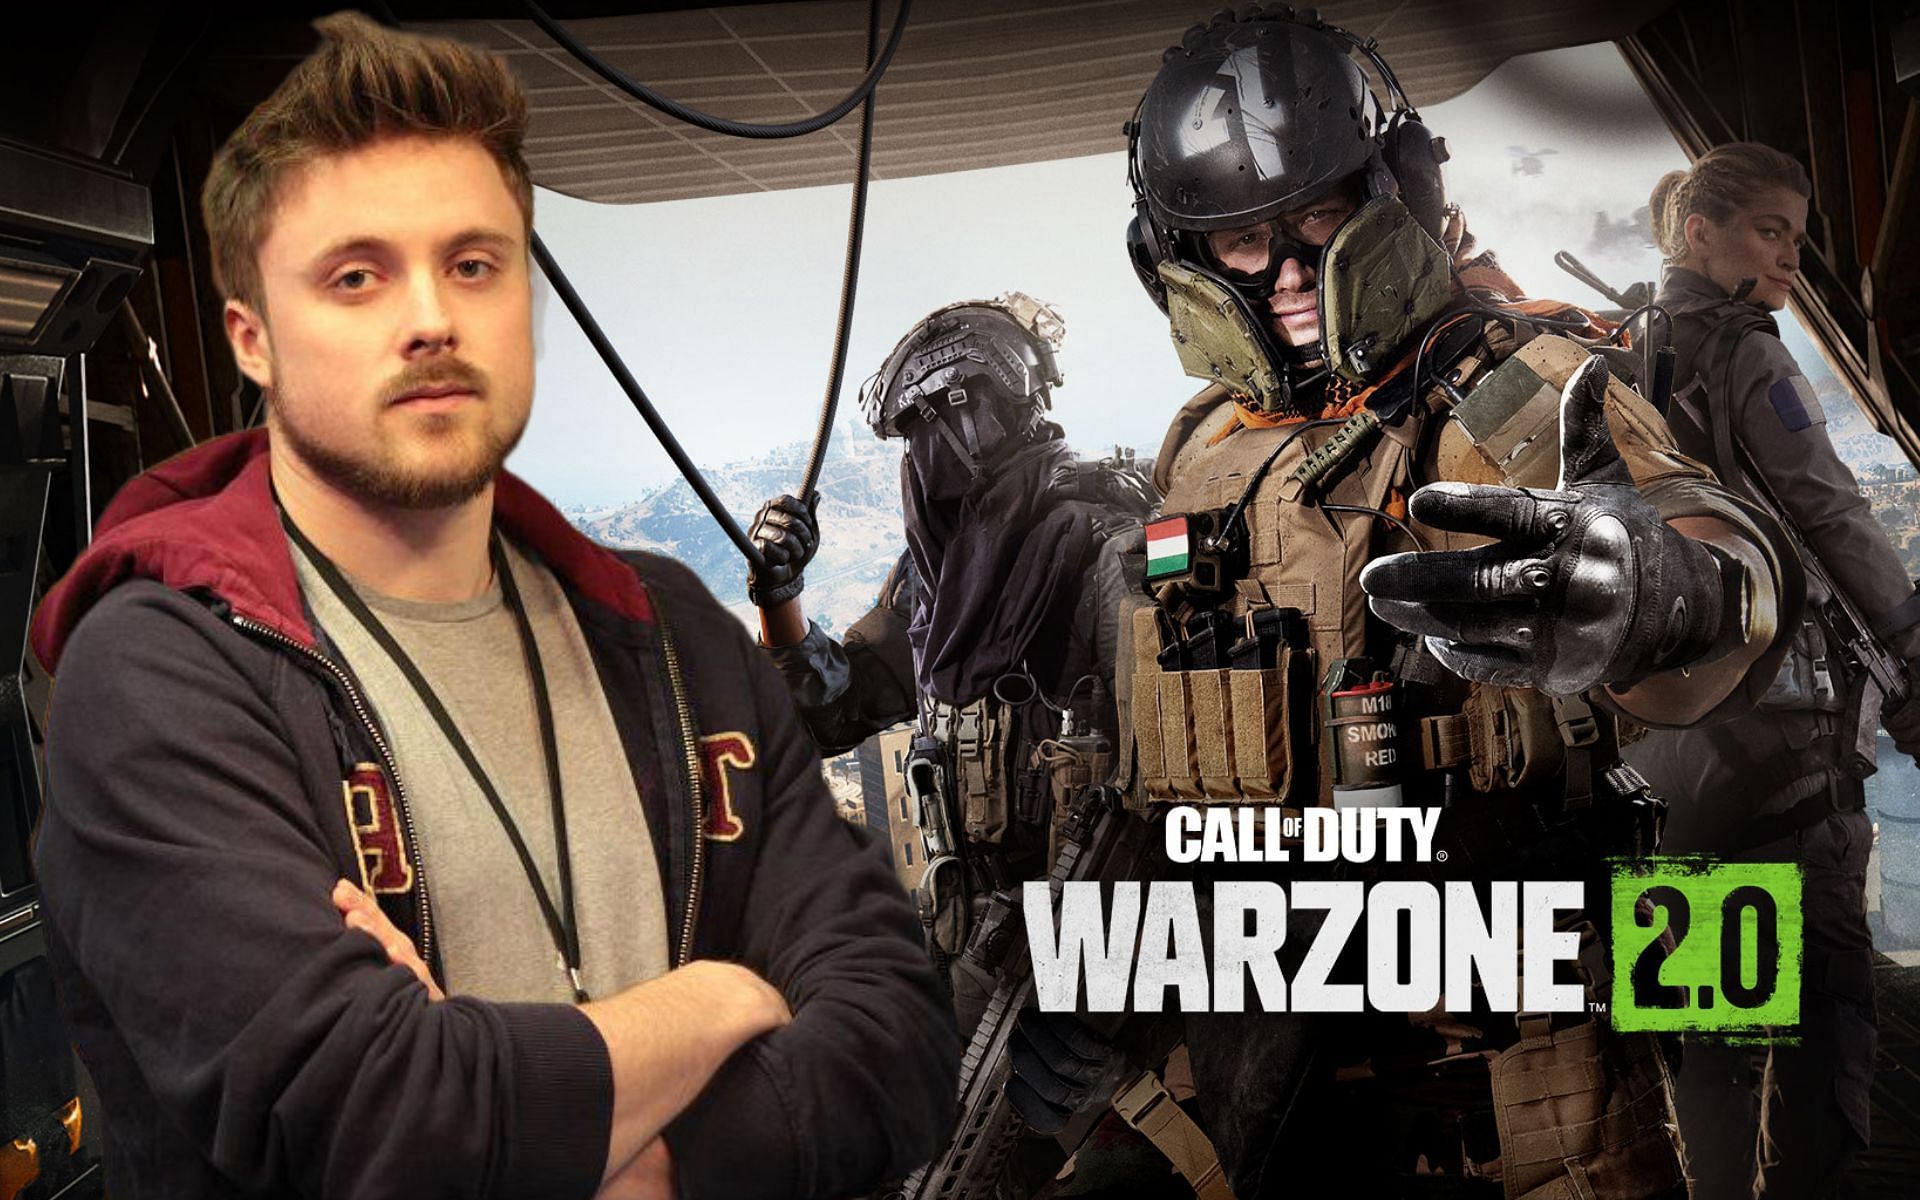 Forsen rages at Call of Duty: Warzone 2.0